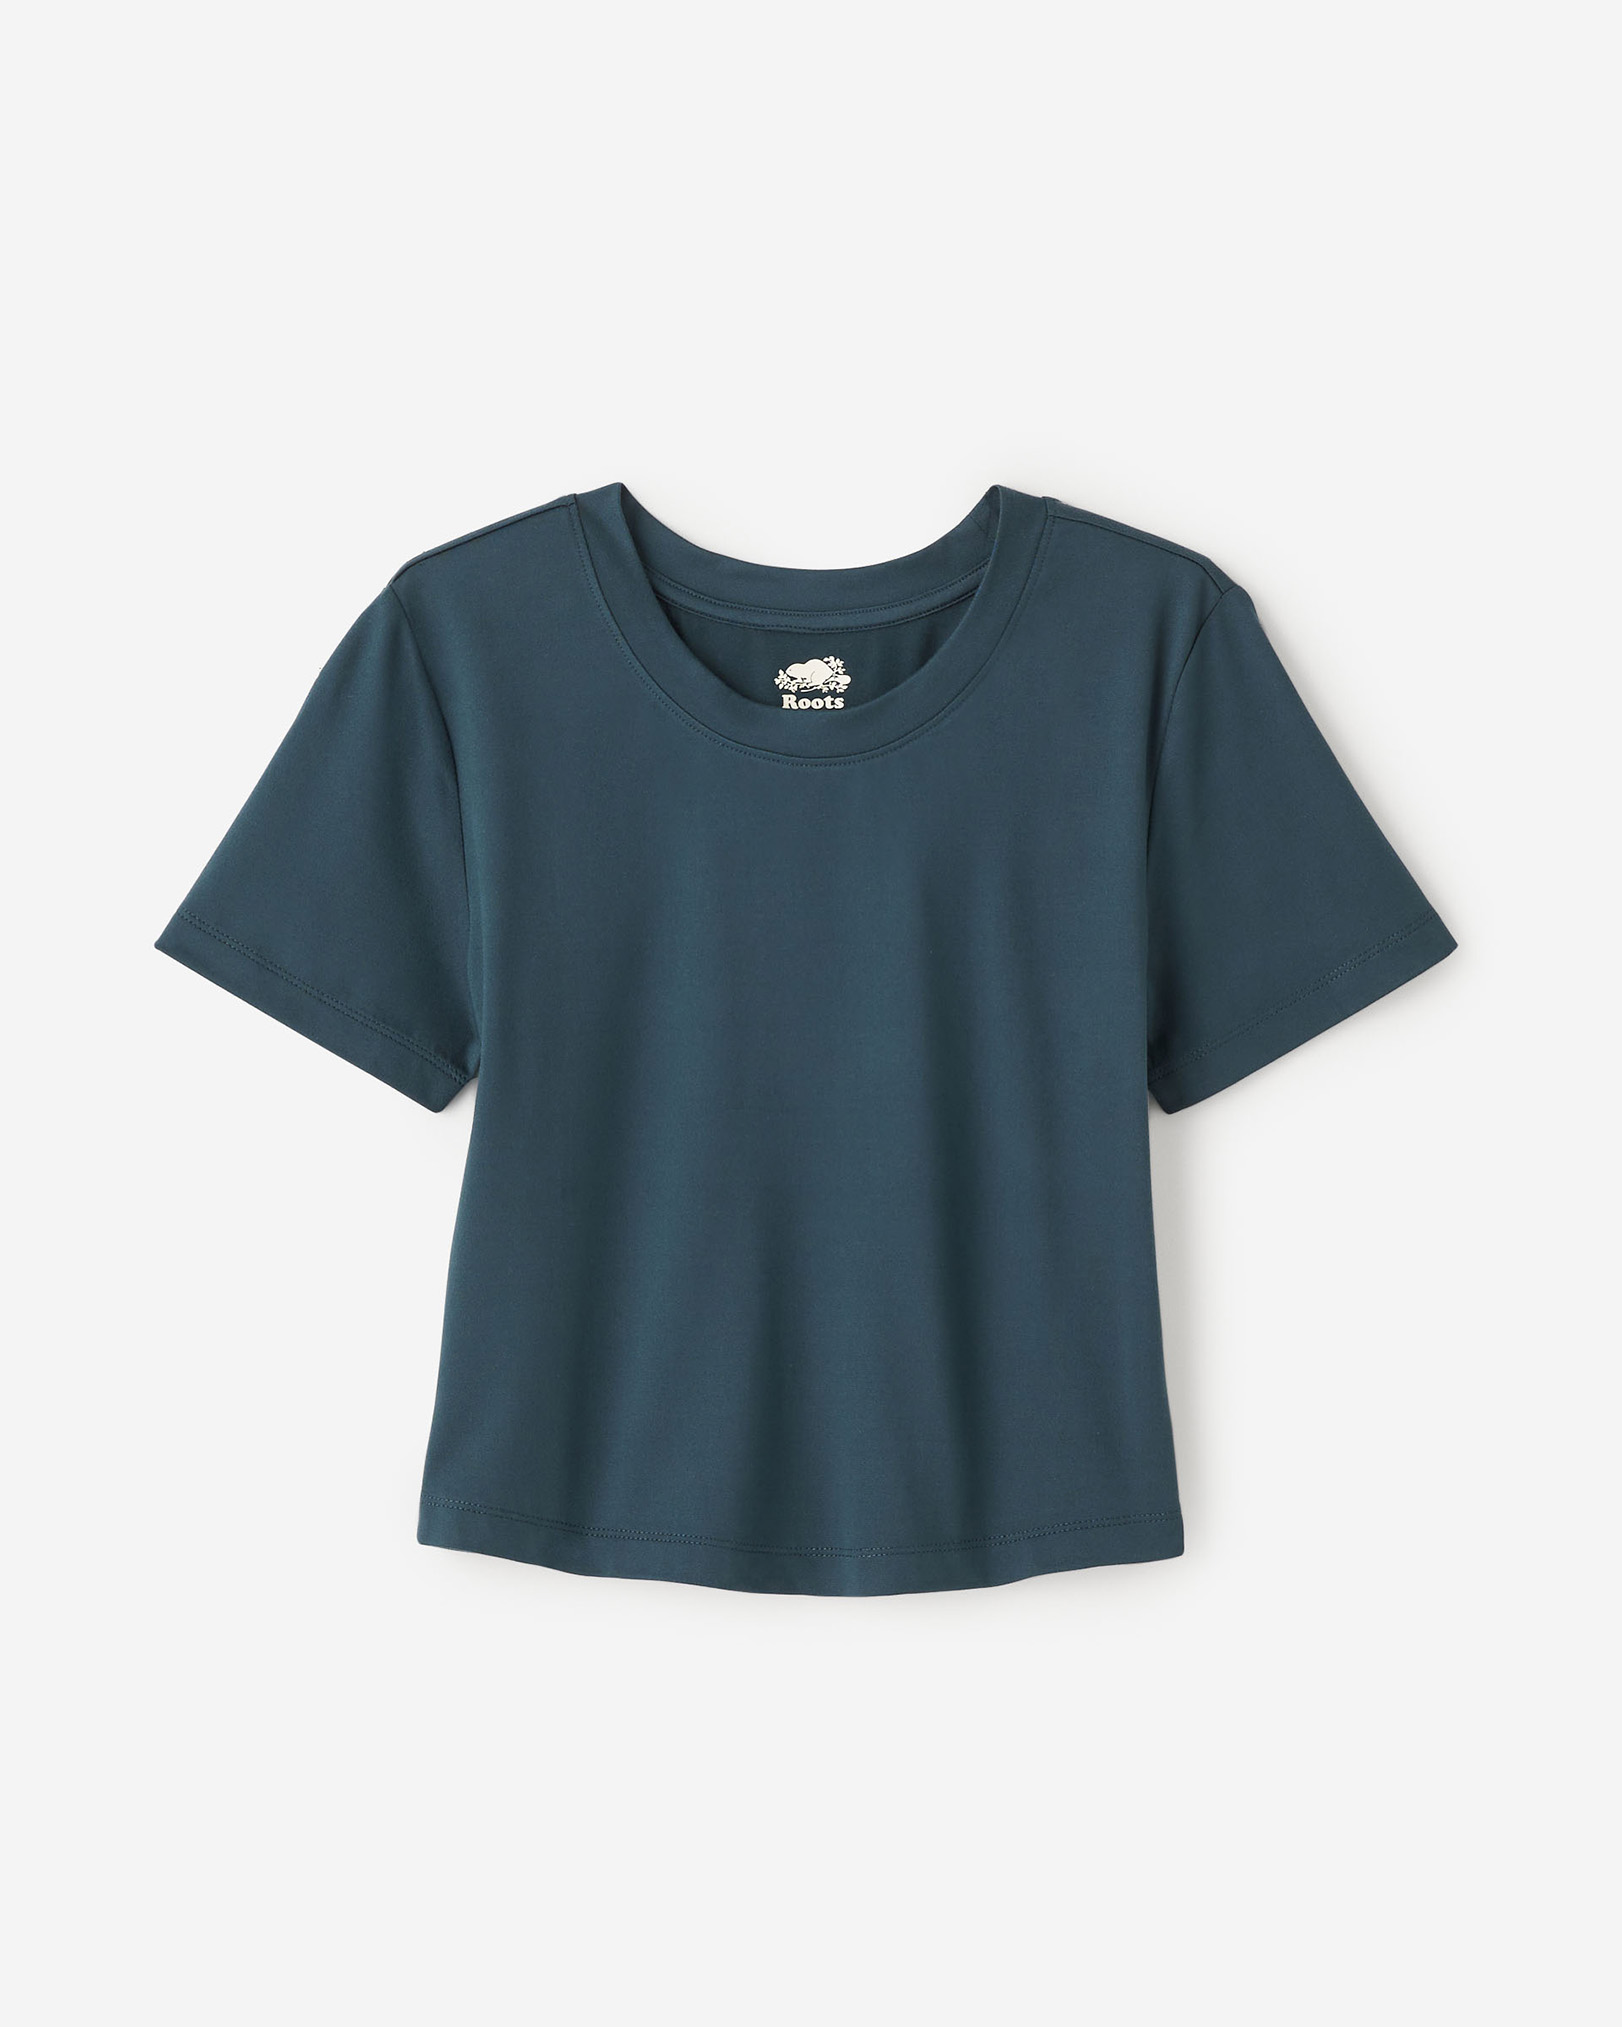 Roots Renew Fitted Short Sleeve T-Shirt in Forest Teal